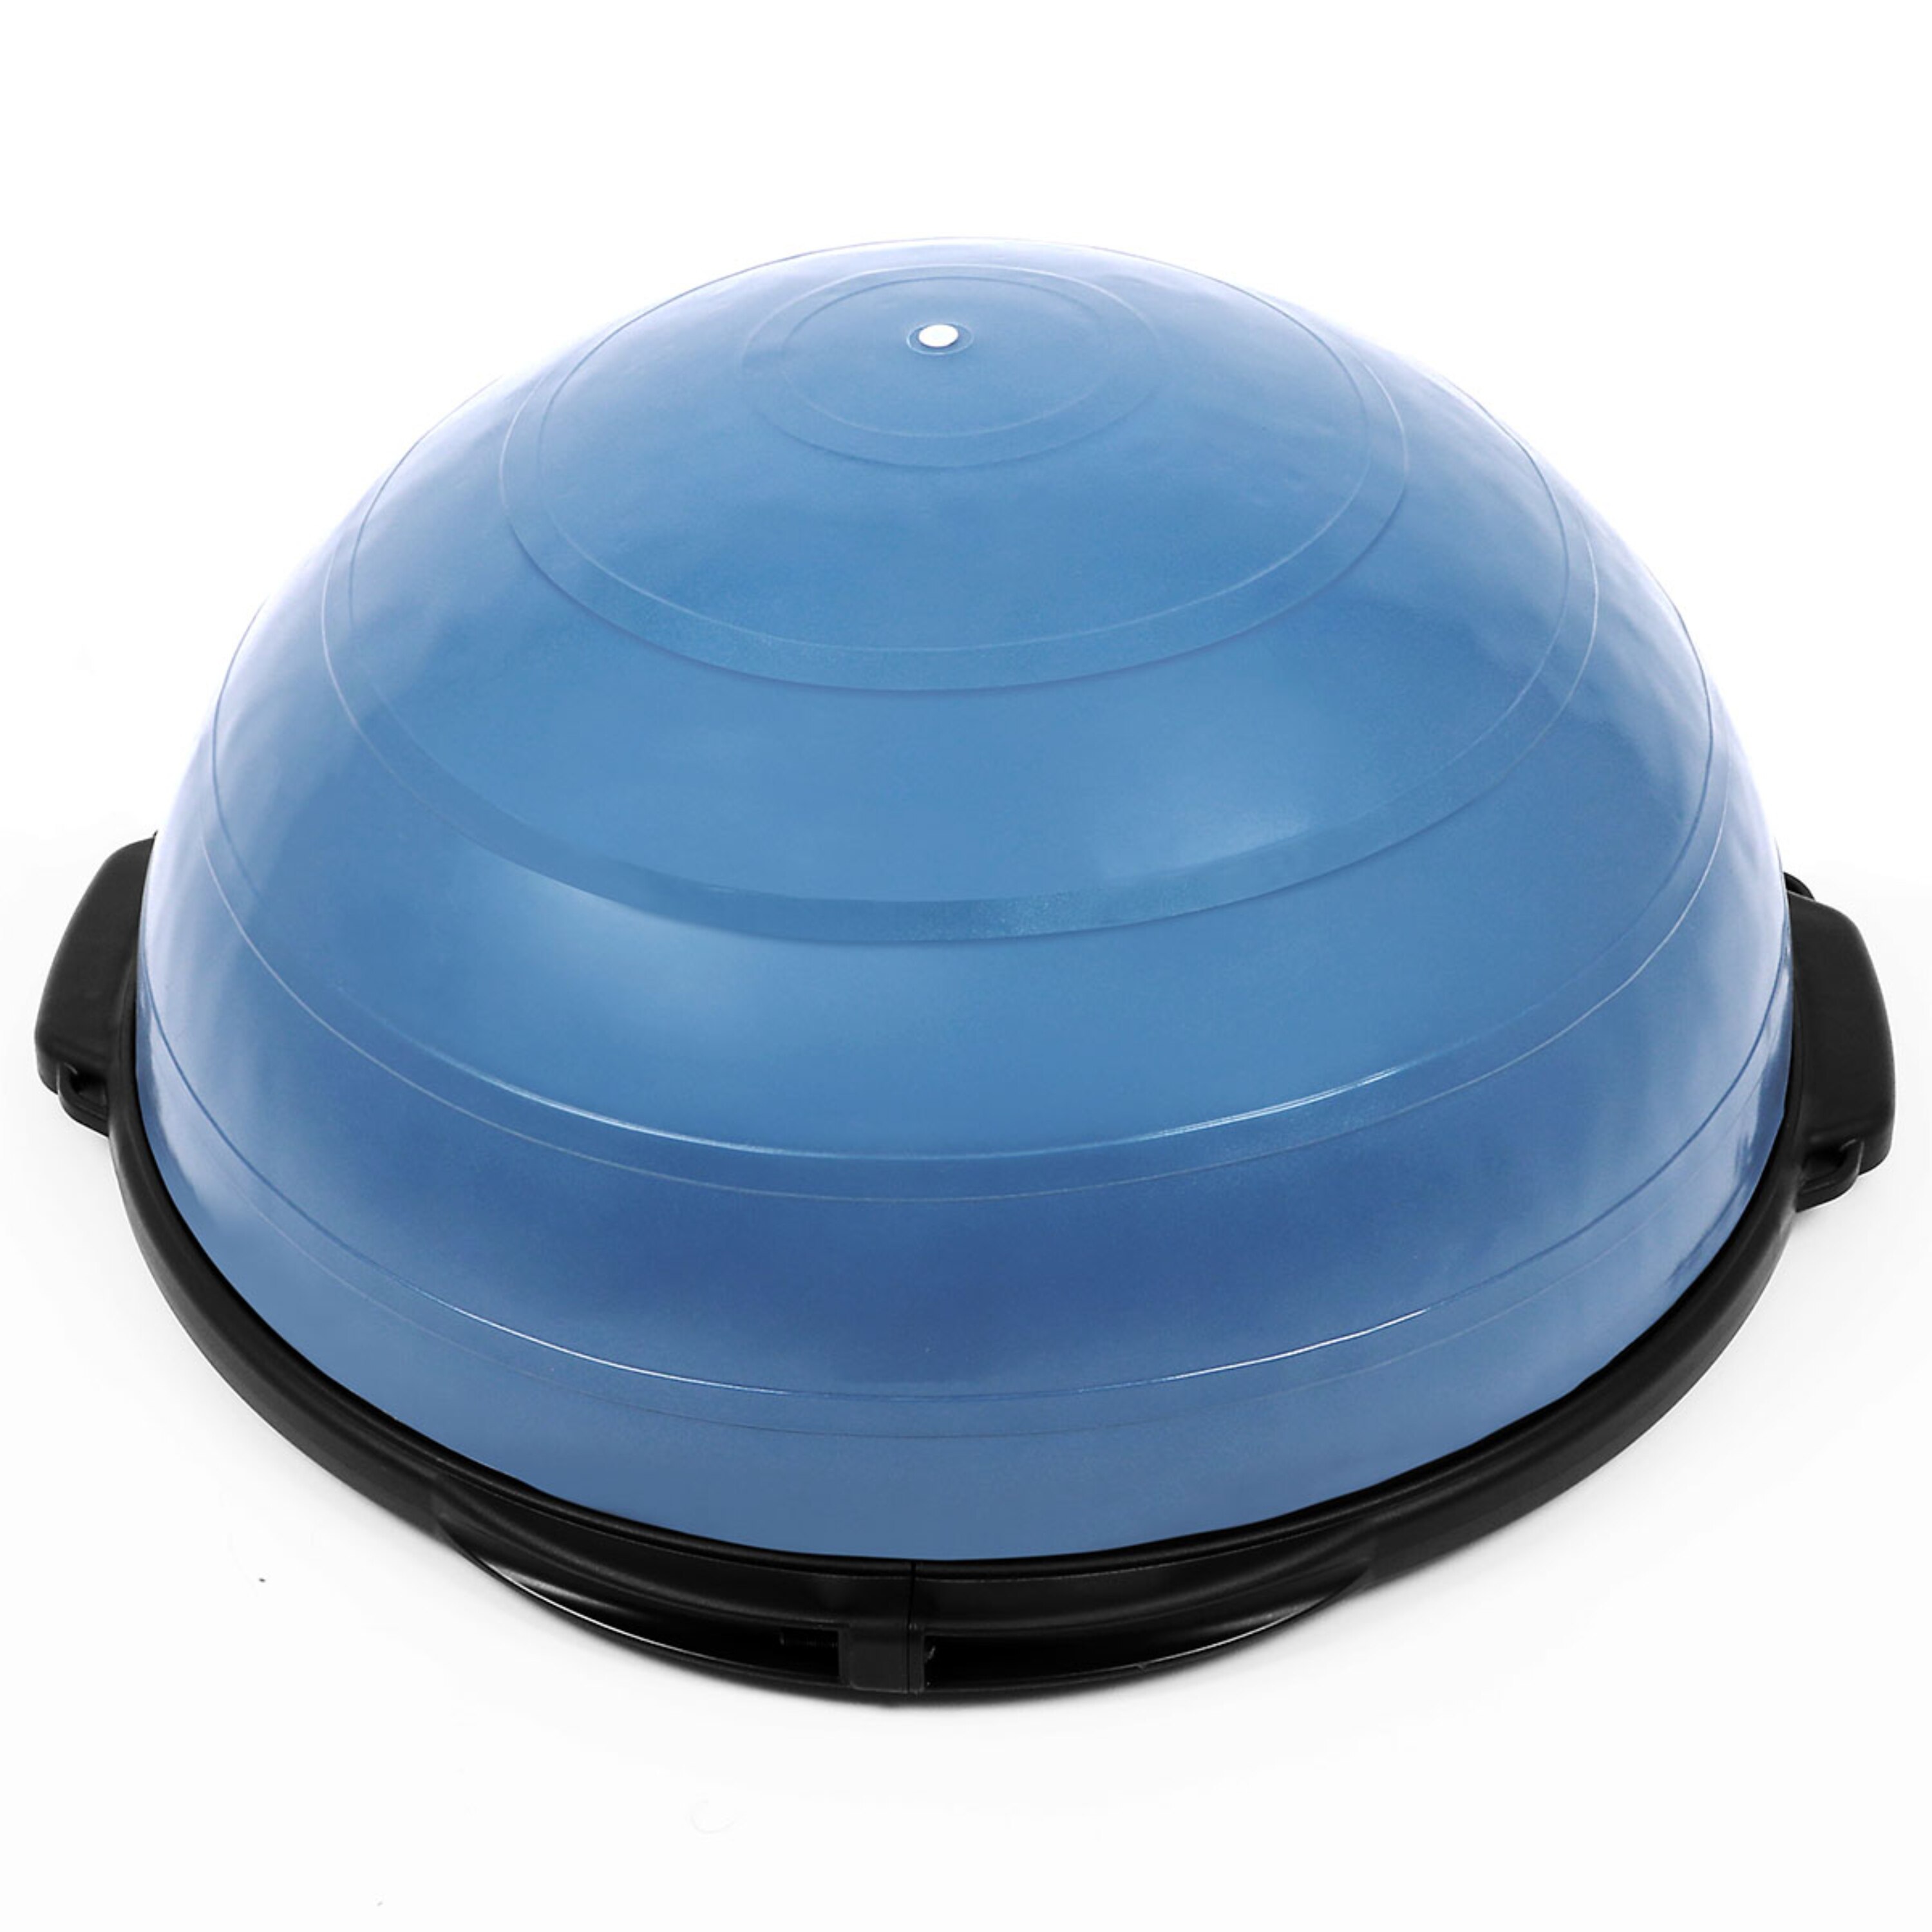 CanDo Balance Dome 21"" with Resistance Cords